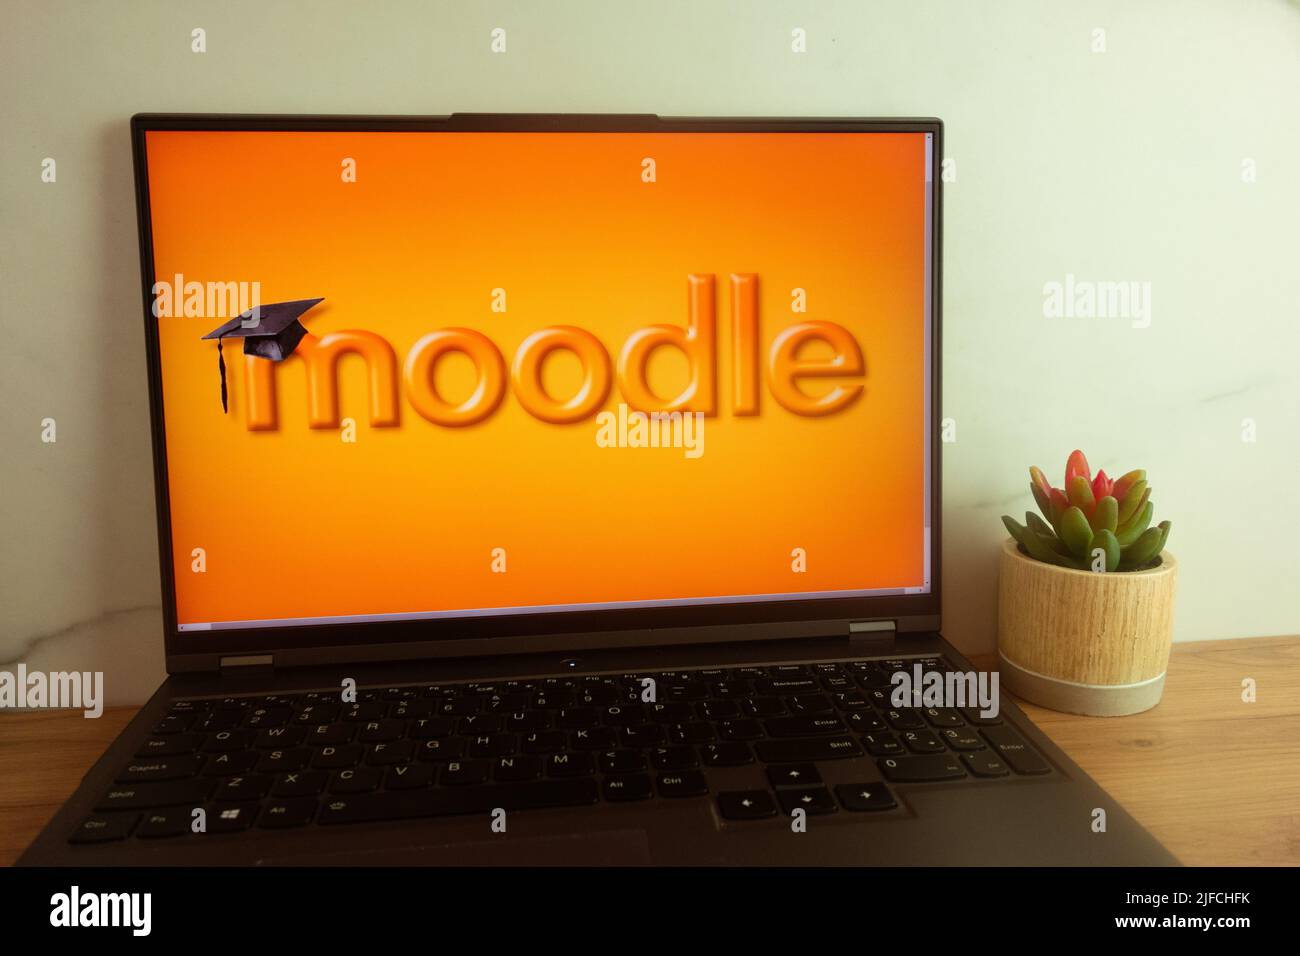 KONSKIE, POLAND - June 30, 2022: Moodle free learning management system logo displayed on laptop computer screen Stock Photo